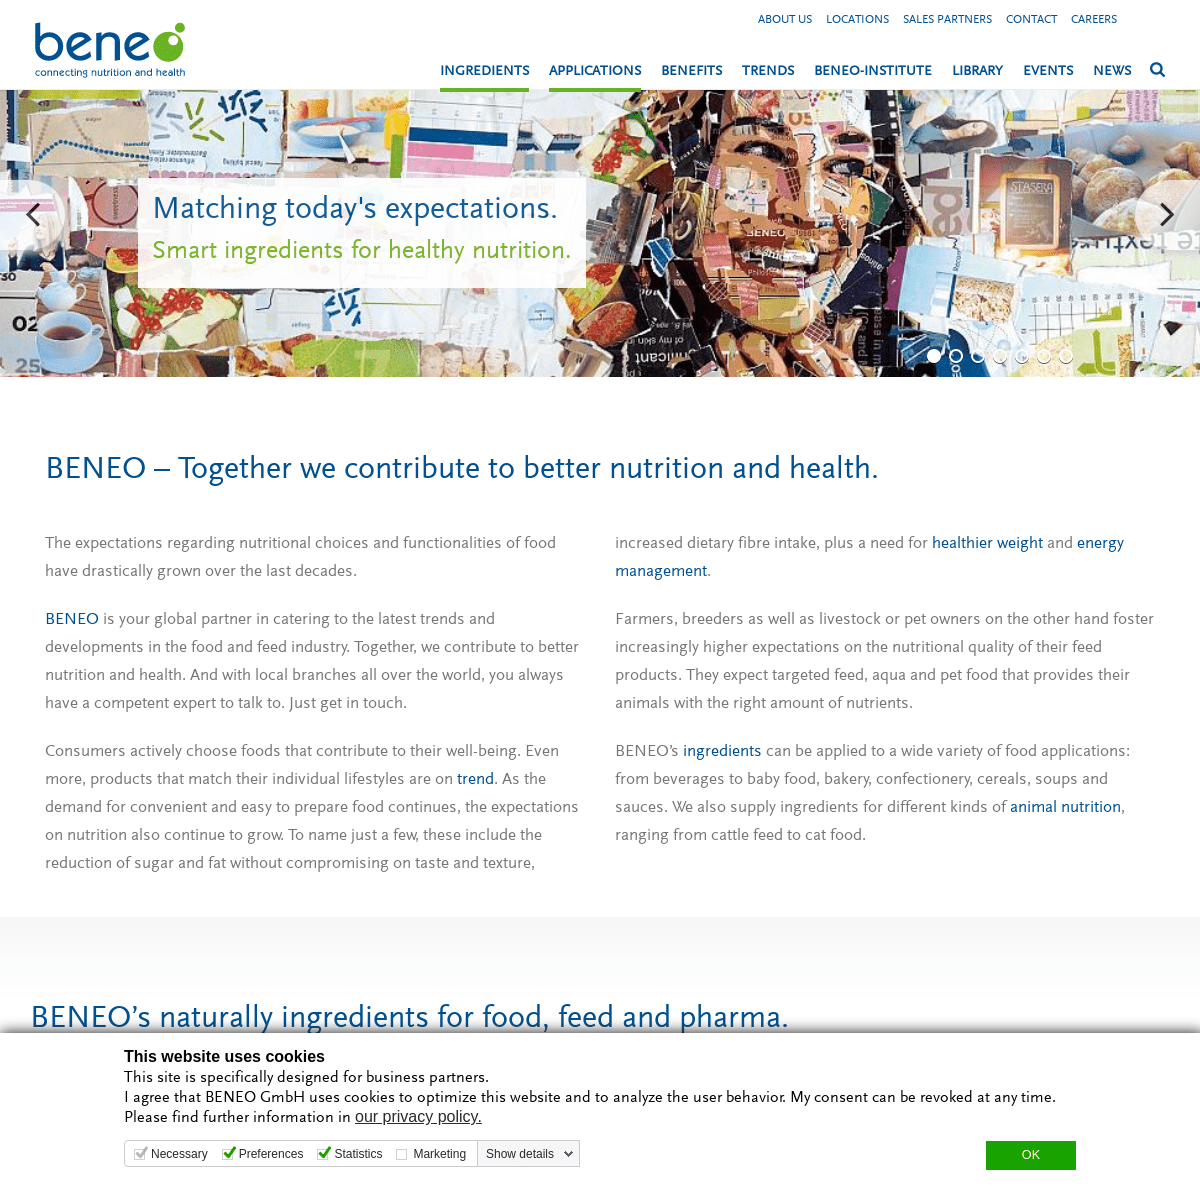 A complete backup of beneo.com